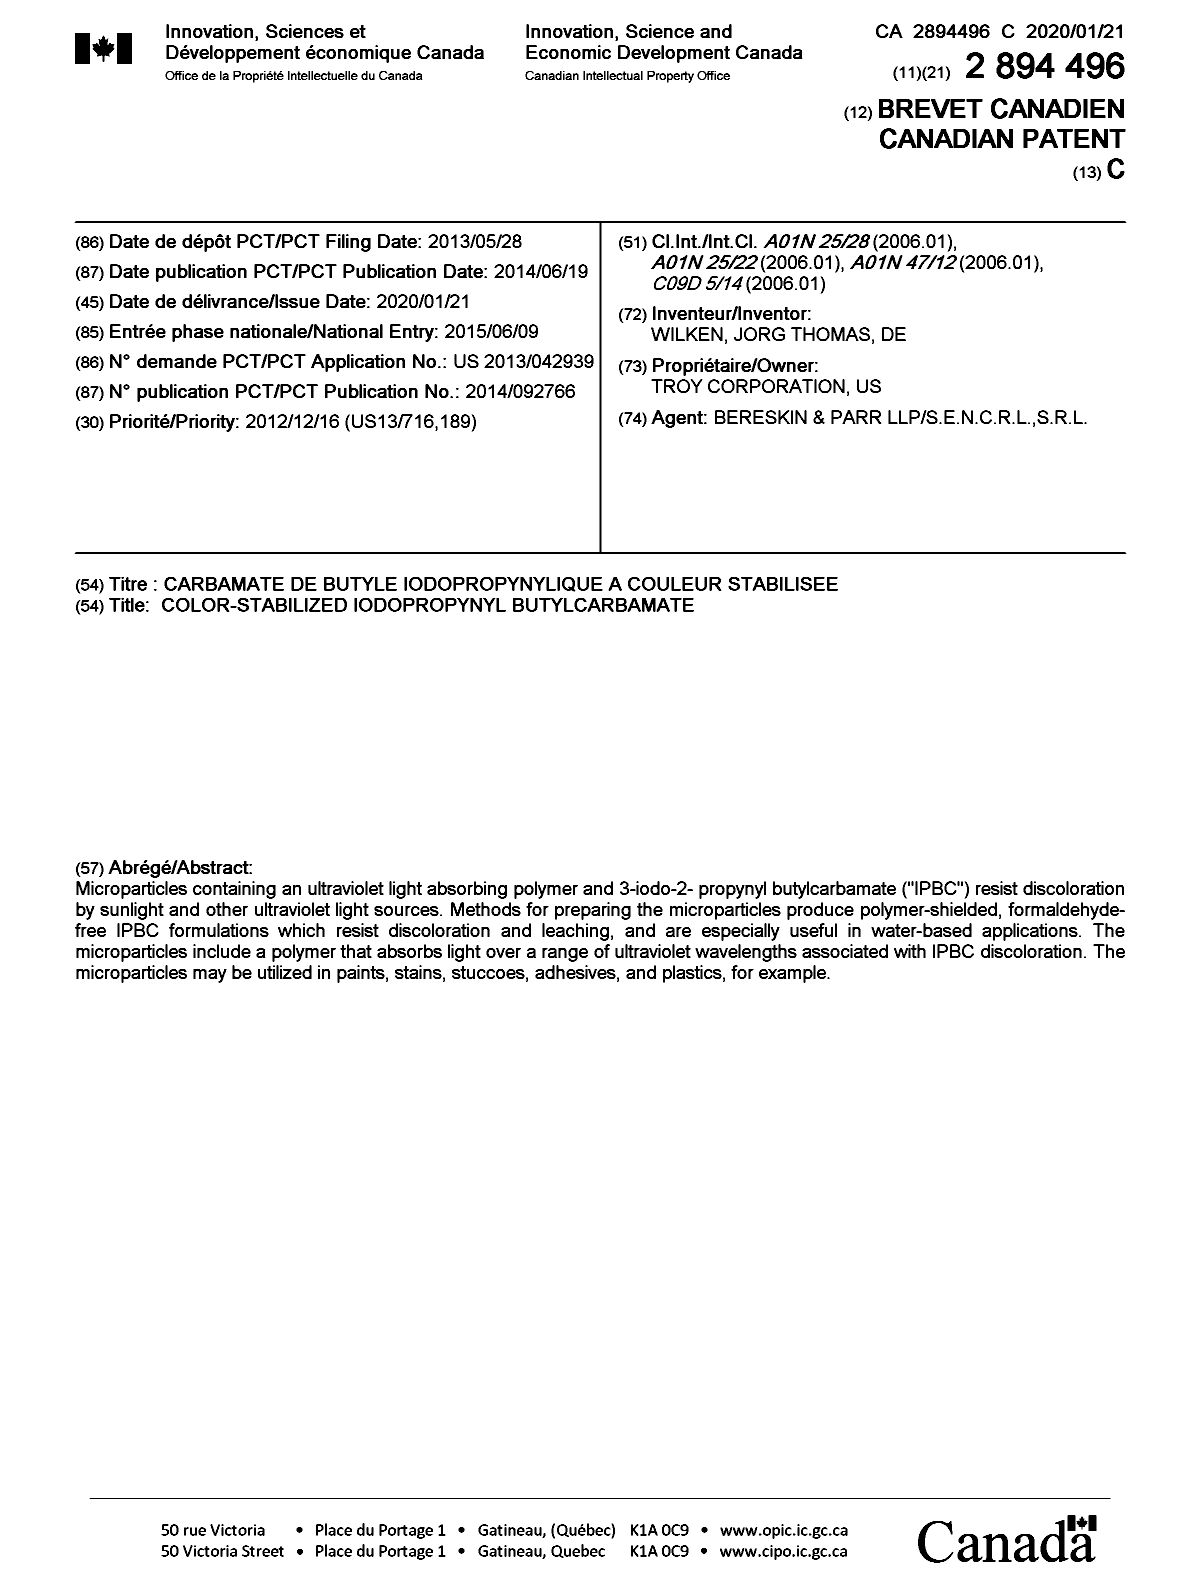 Canadian Patent Document 2894496. Cover Page 20200115. Image 1 of 1